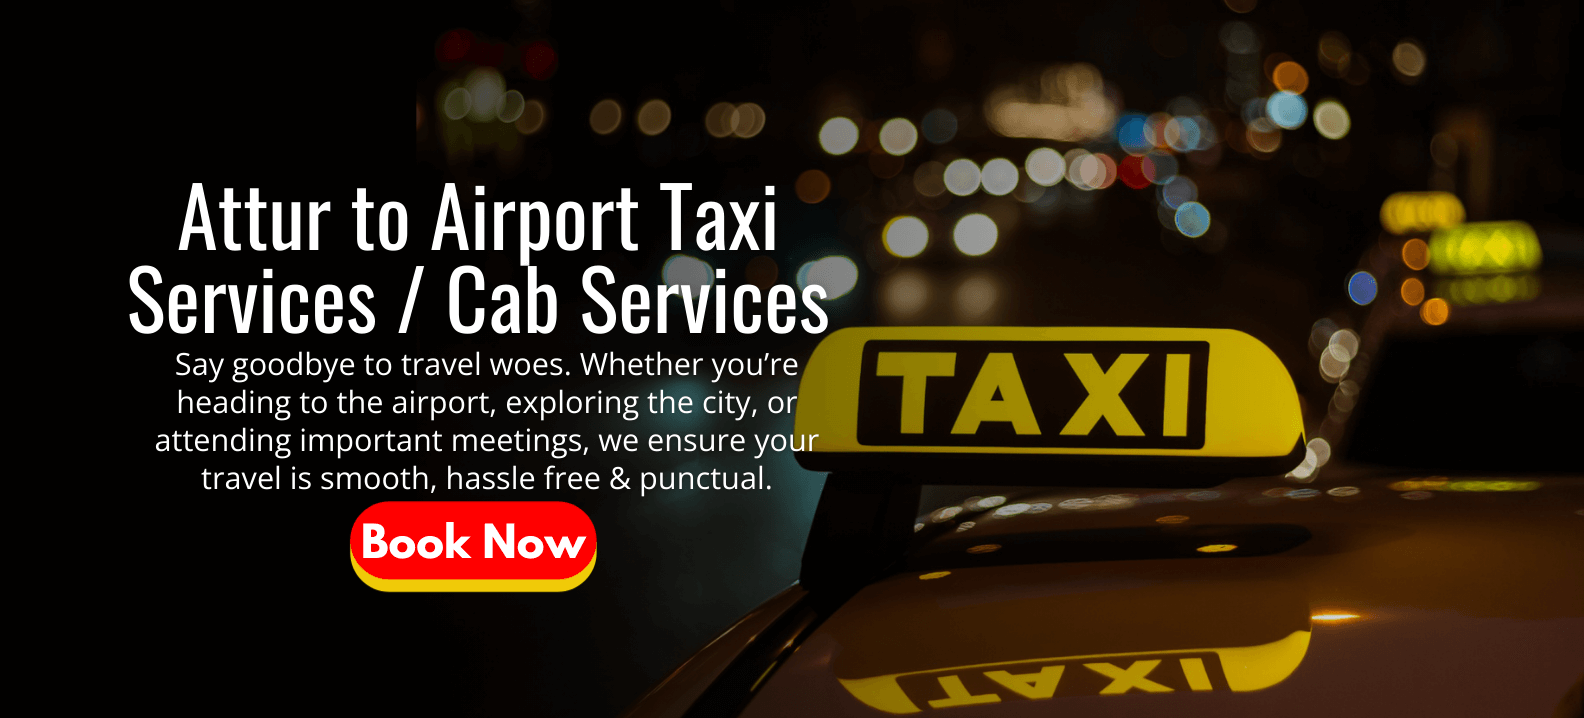 Attur to Airport Taxi Services _ Cab Services